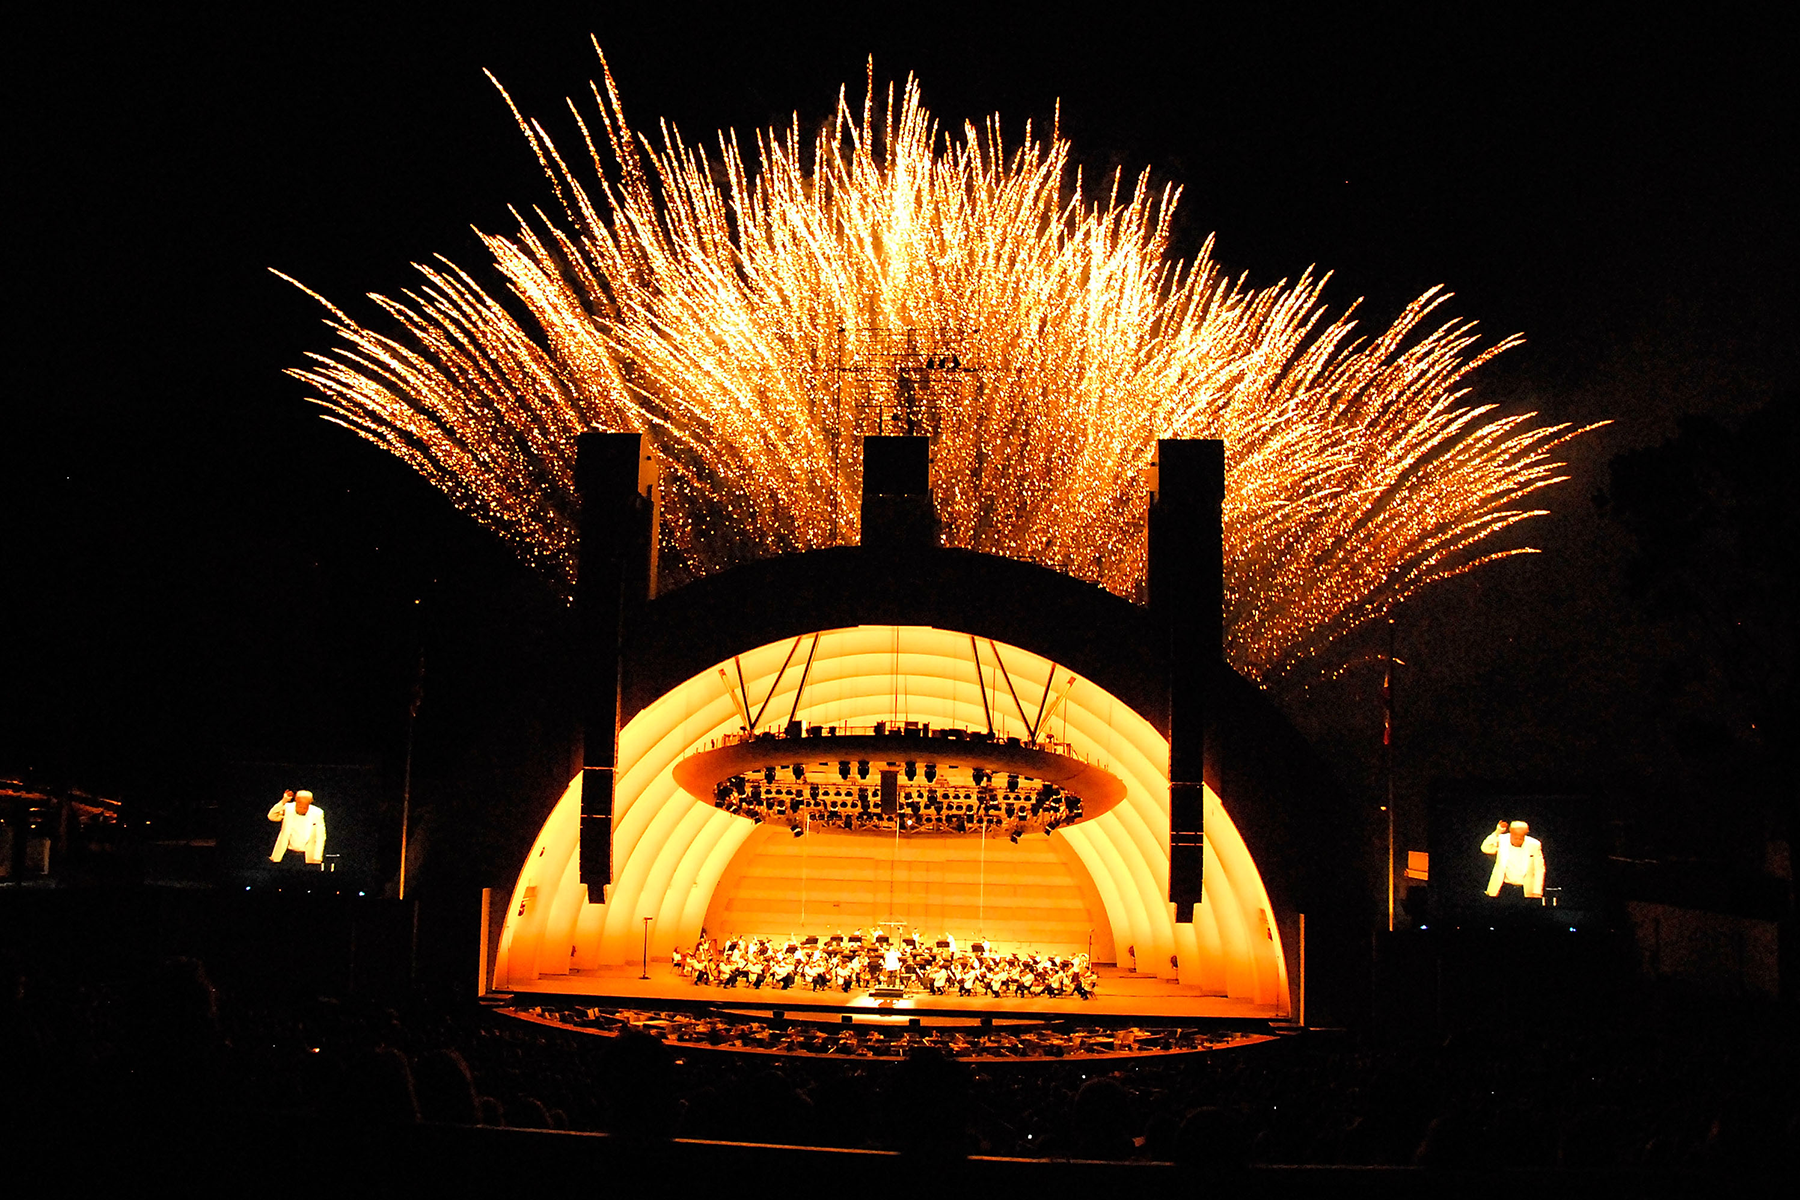 The Hollywood Bowl's summer season plans to be back in 2022